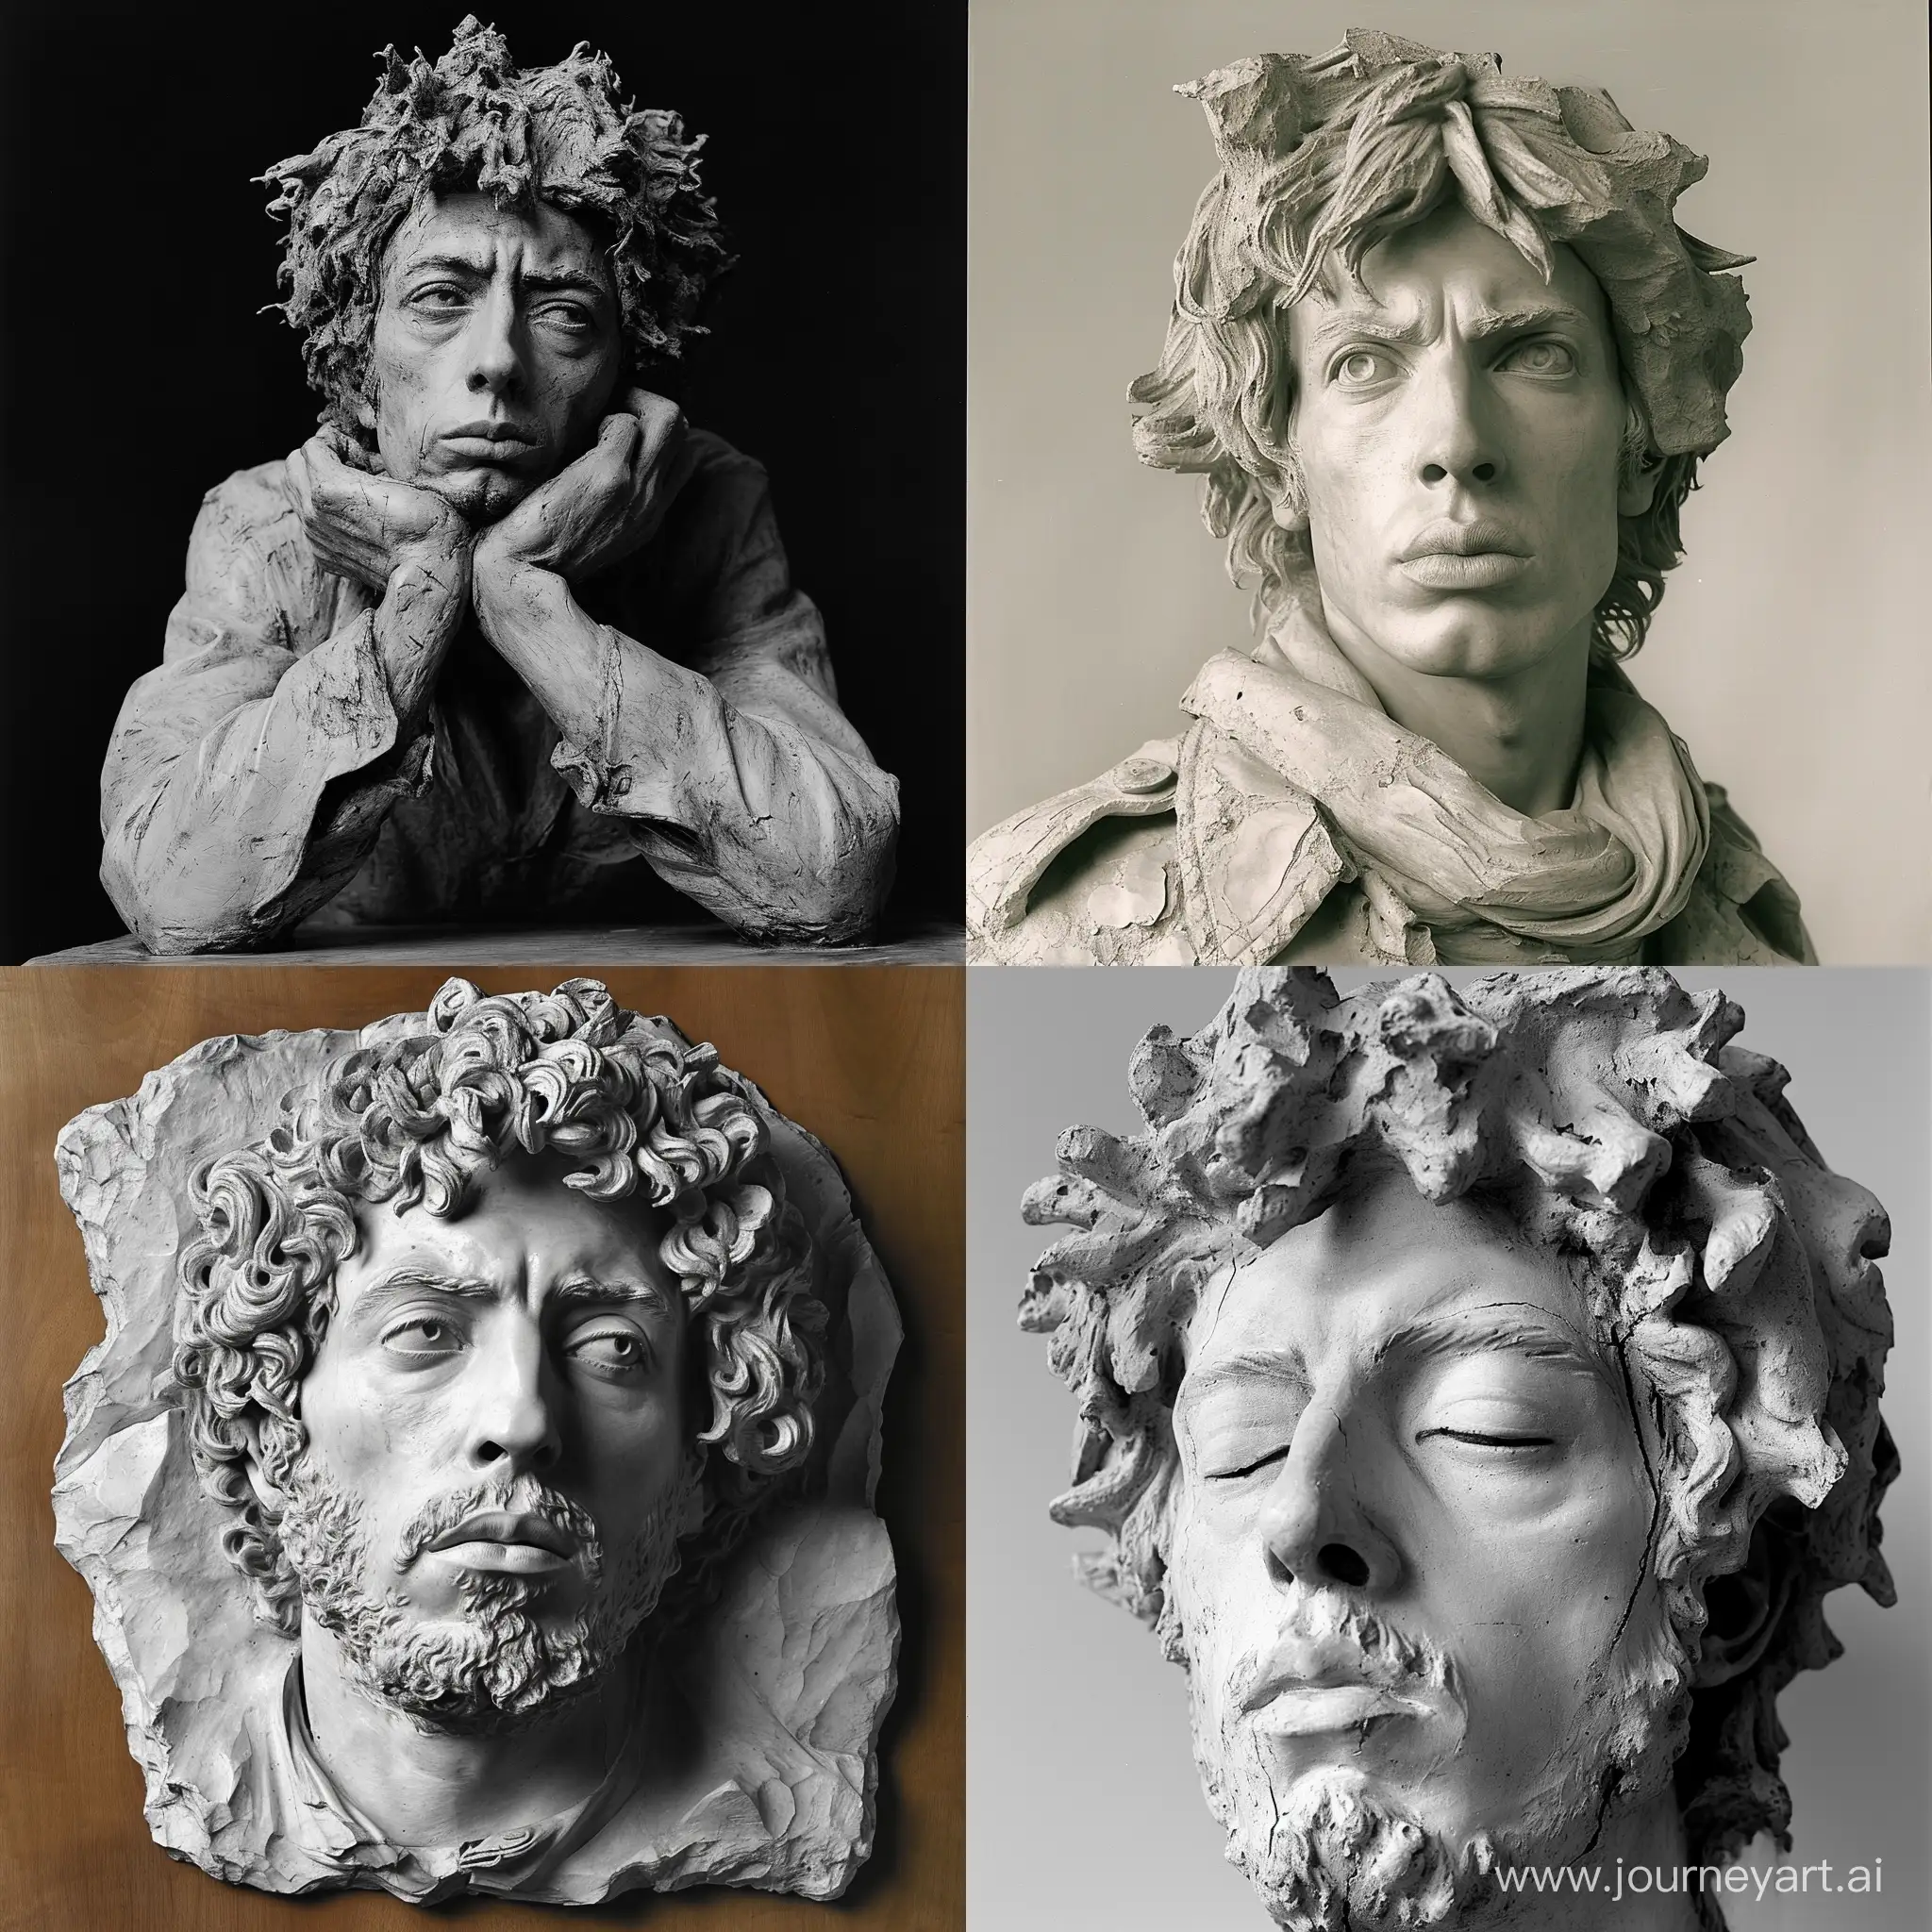 Bob-Dylan-in-the-60s-Iconic-Sculpture-by-Michelangelo